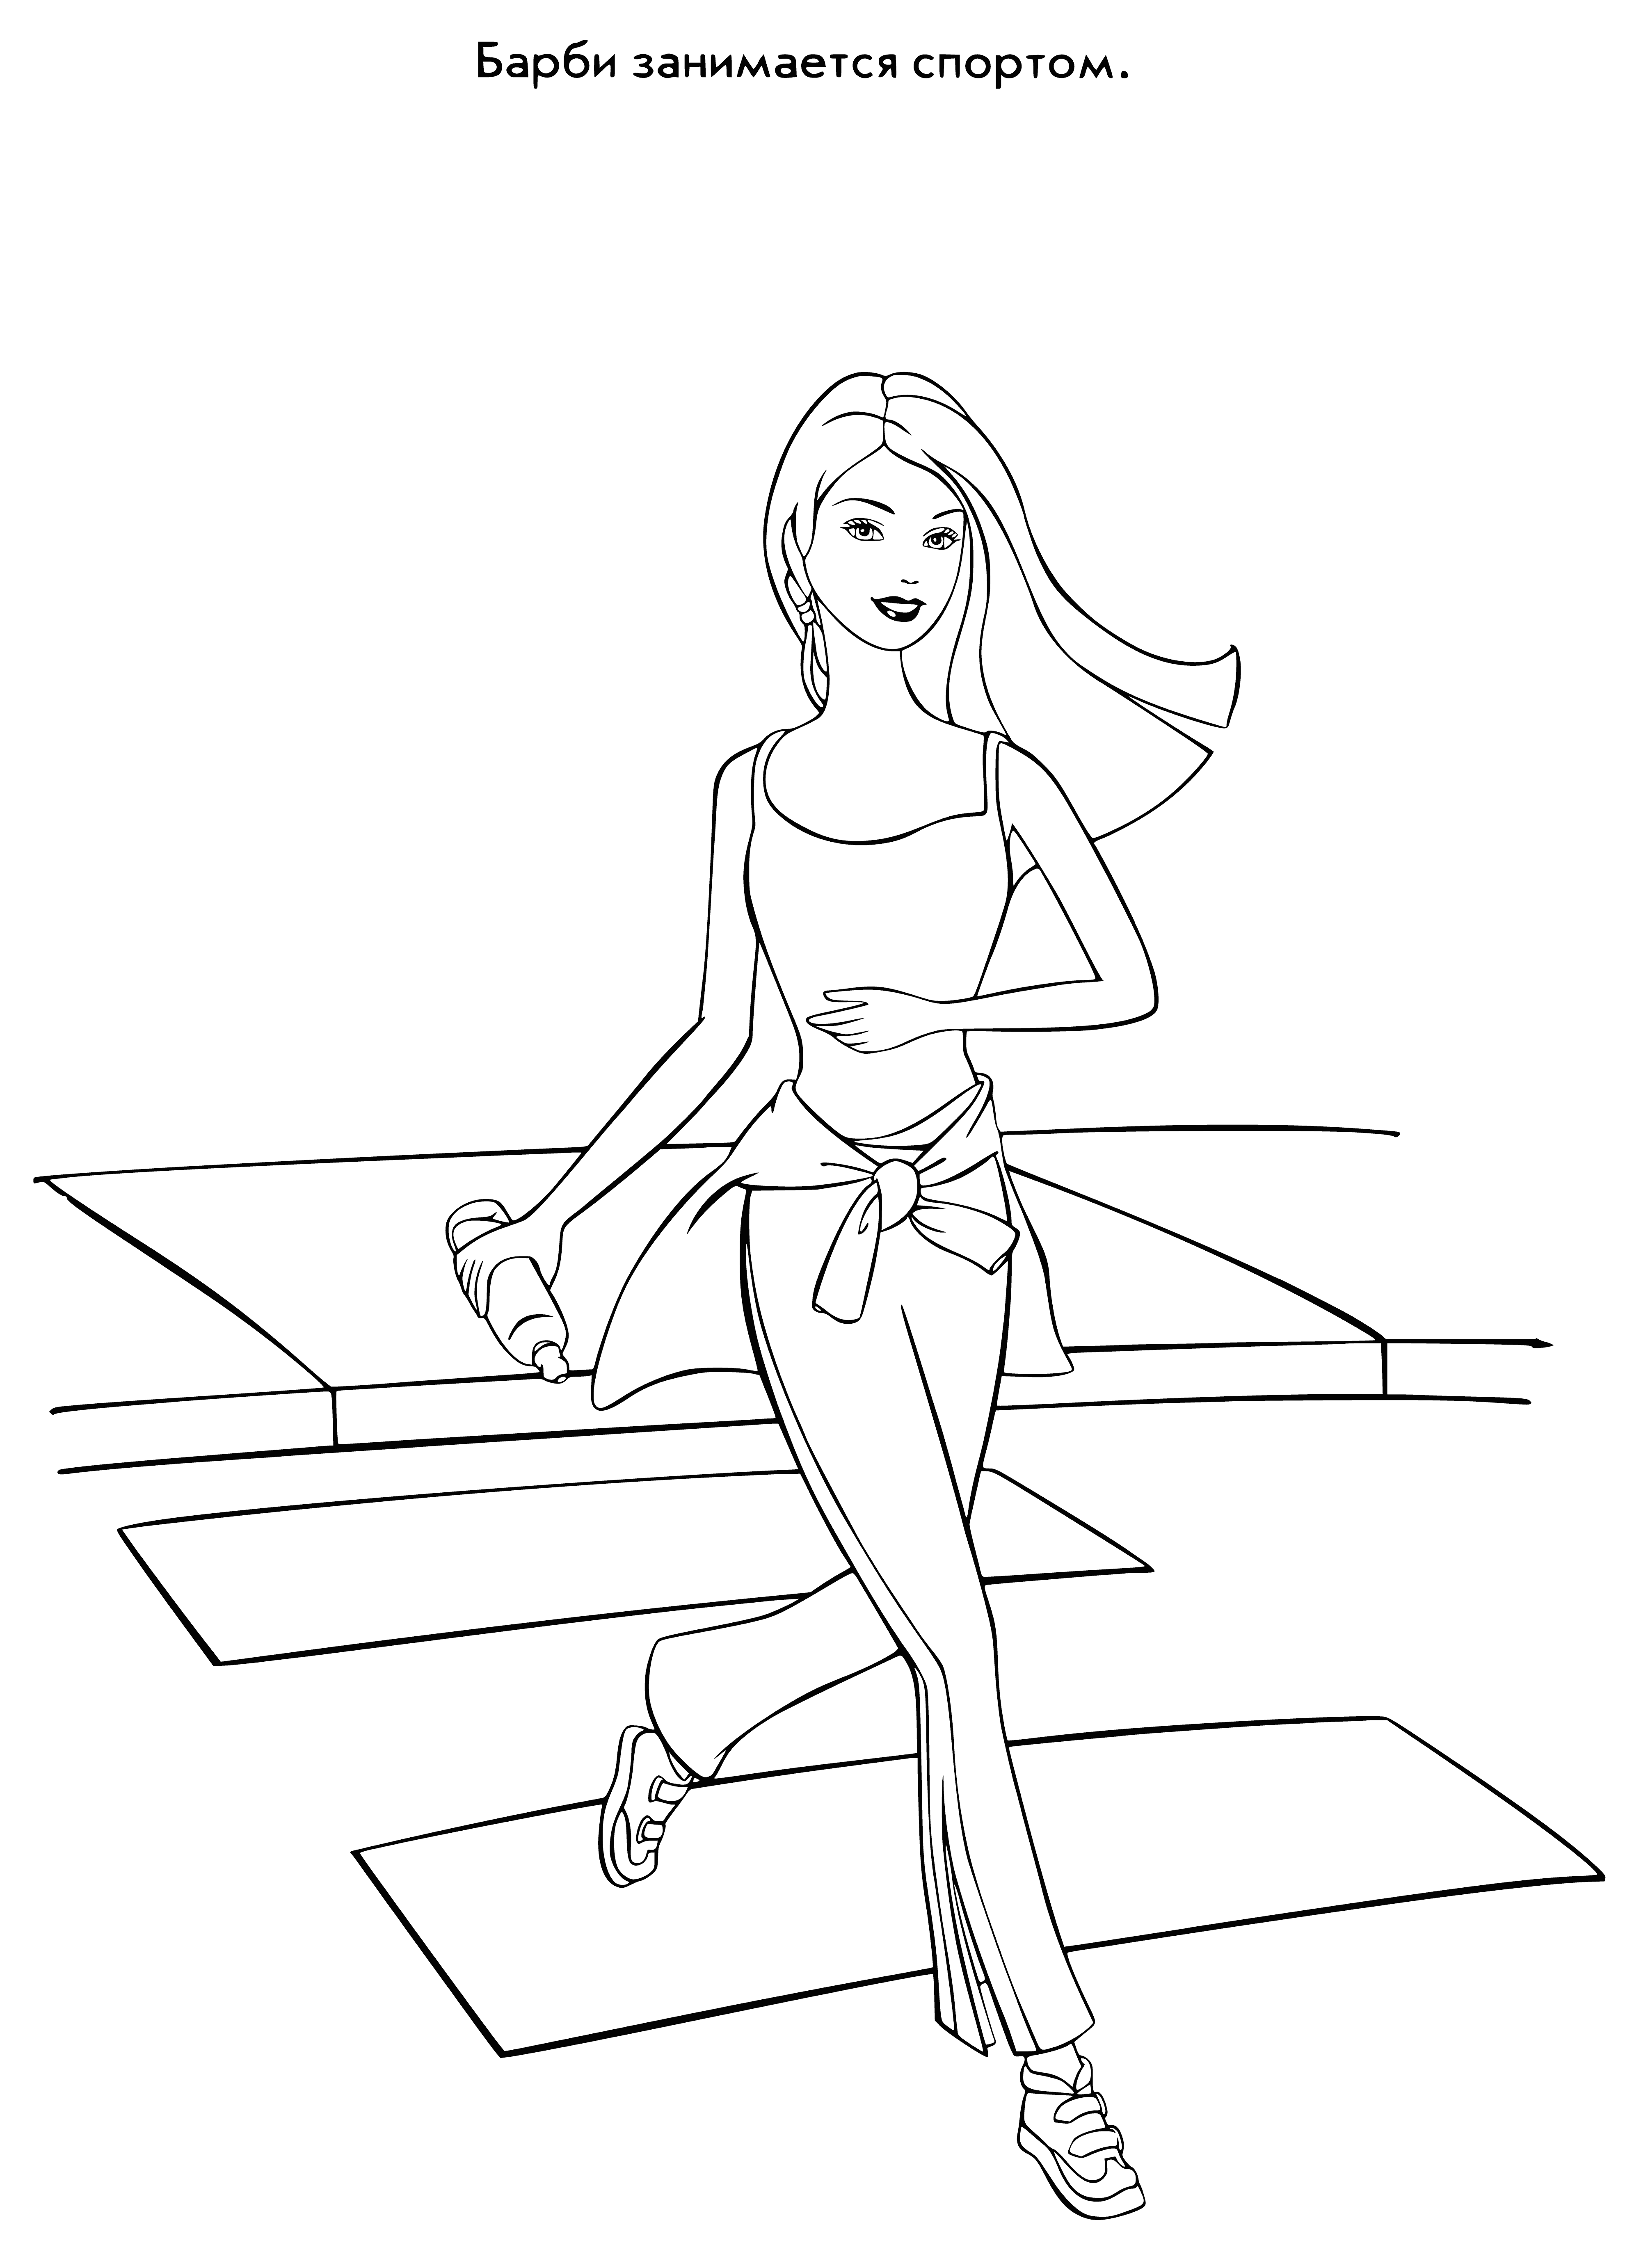 coloring page: Barbie in workout clothes holding water bottle in front of brick wall - coloring page. #coloringpages #barbie